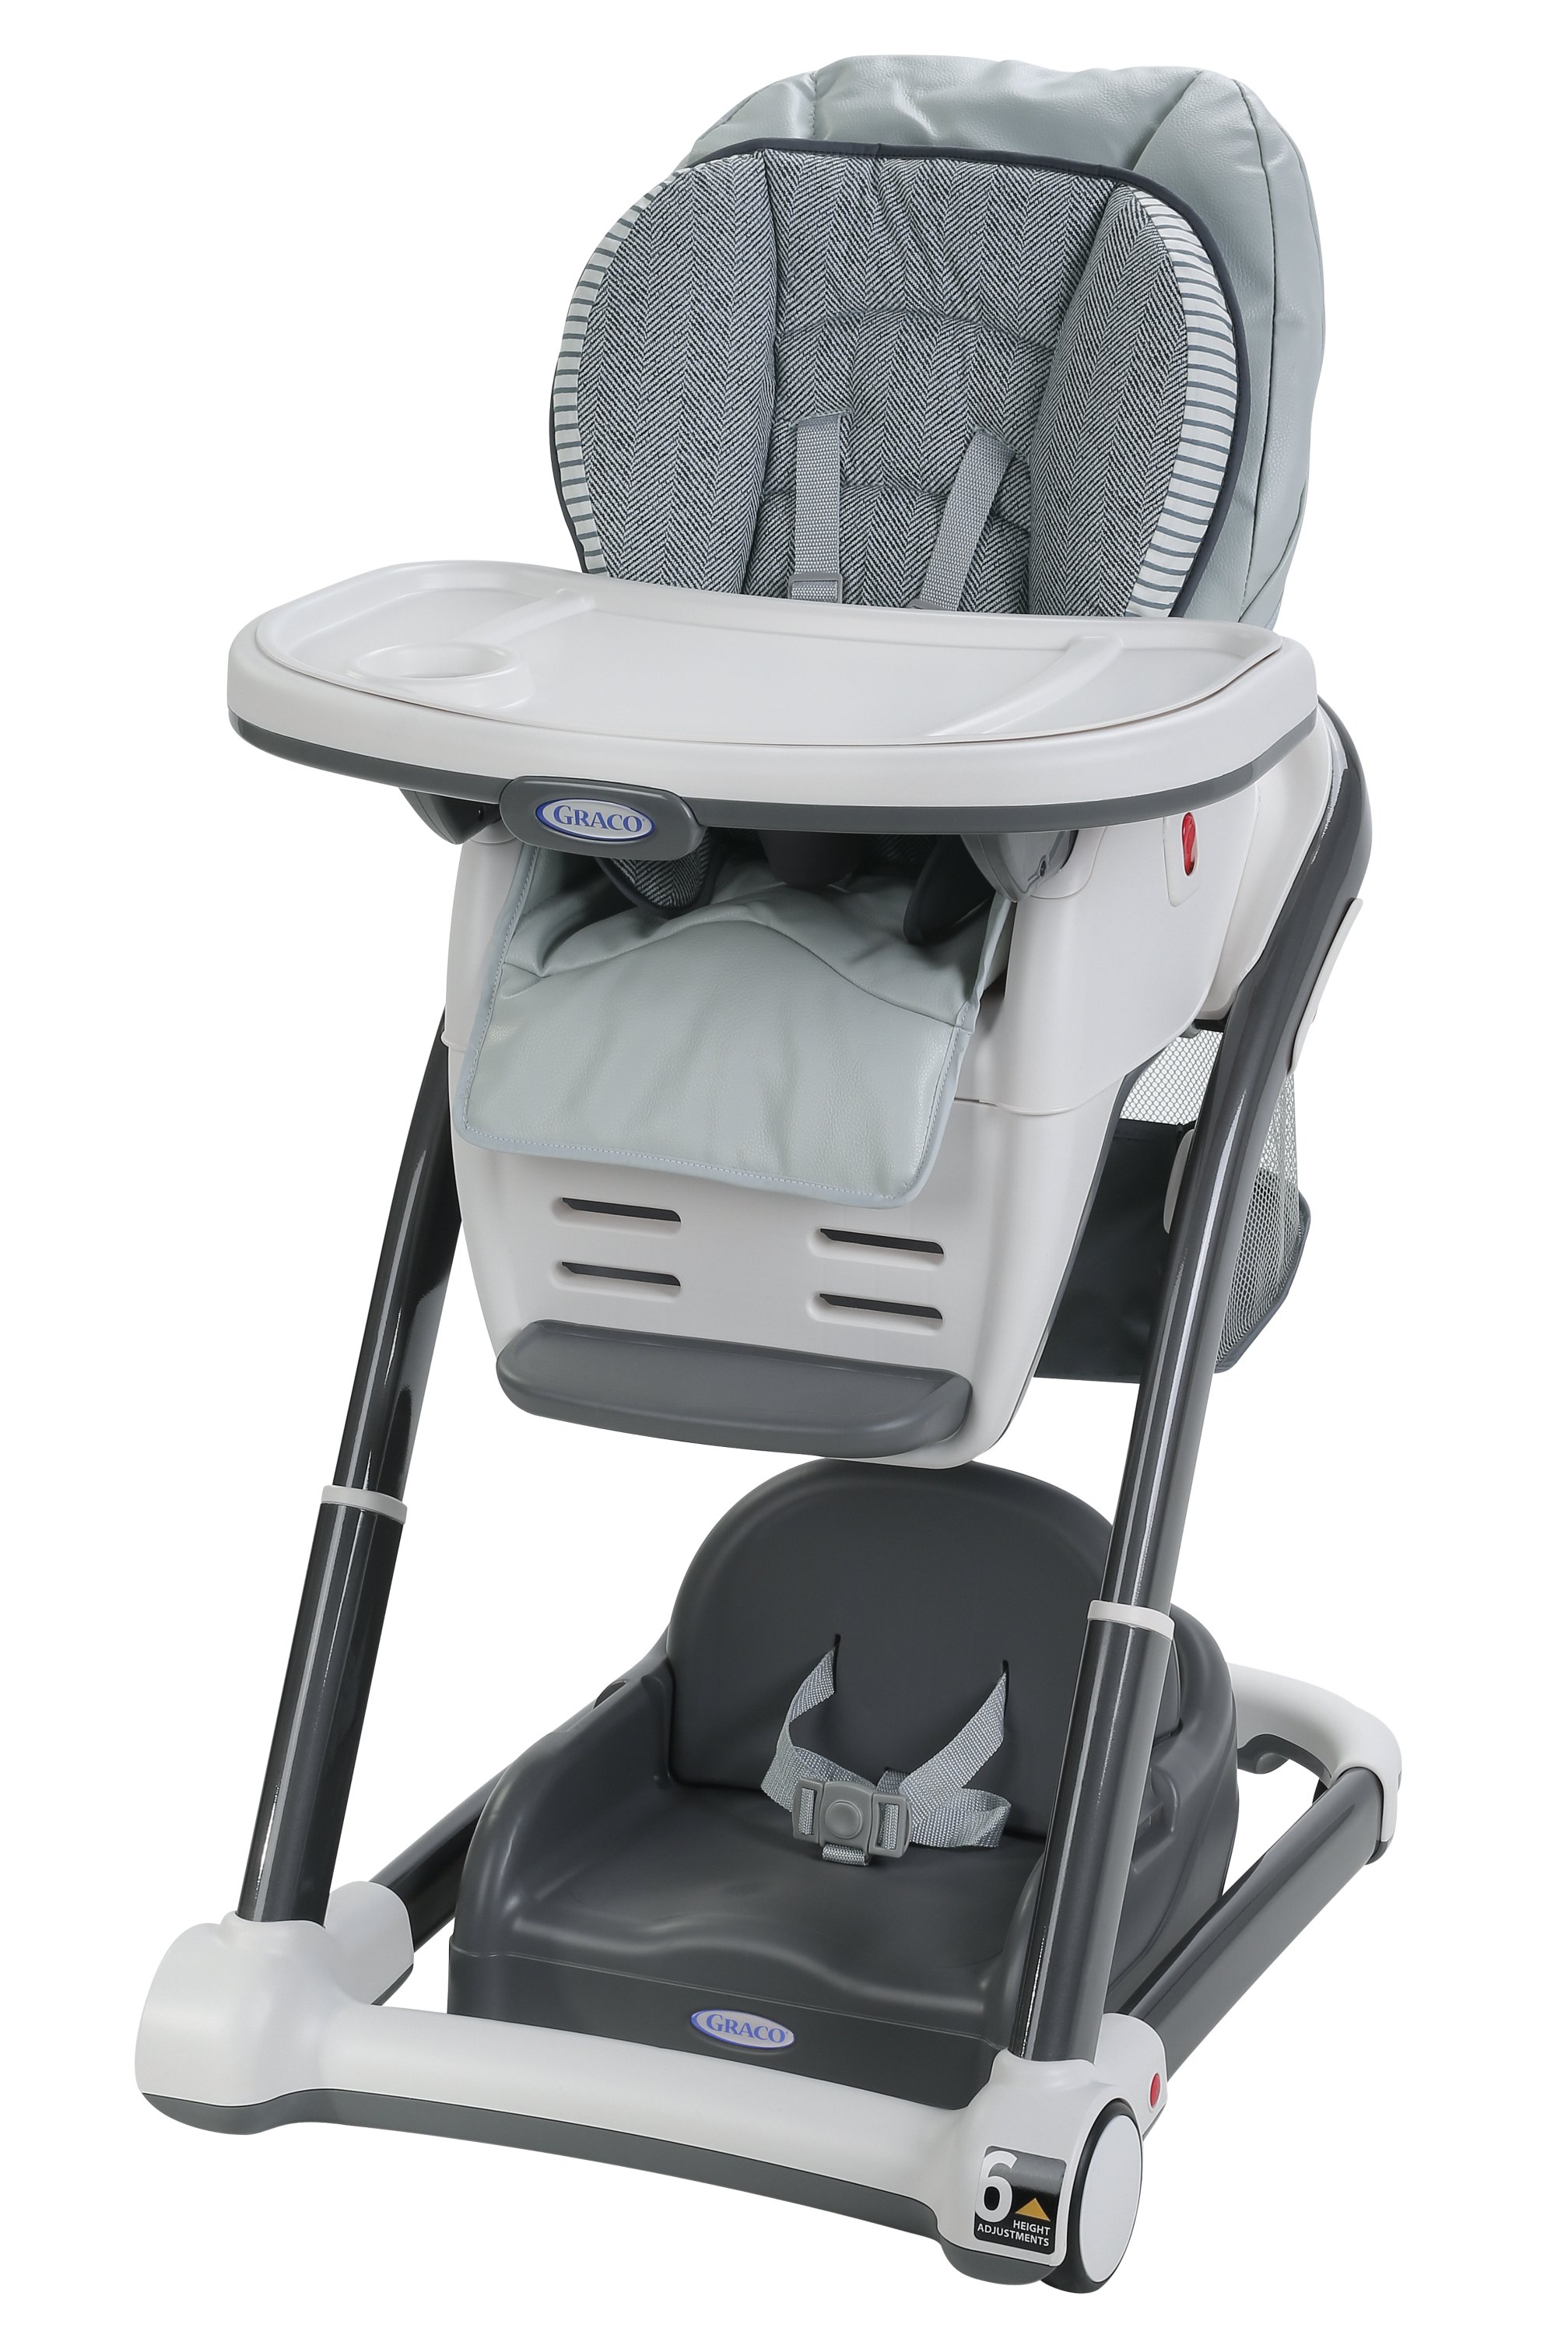 Graco High Chair In One | vlr.eng.br